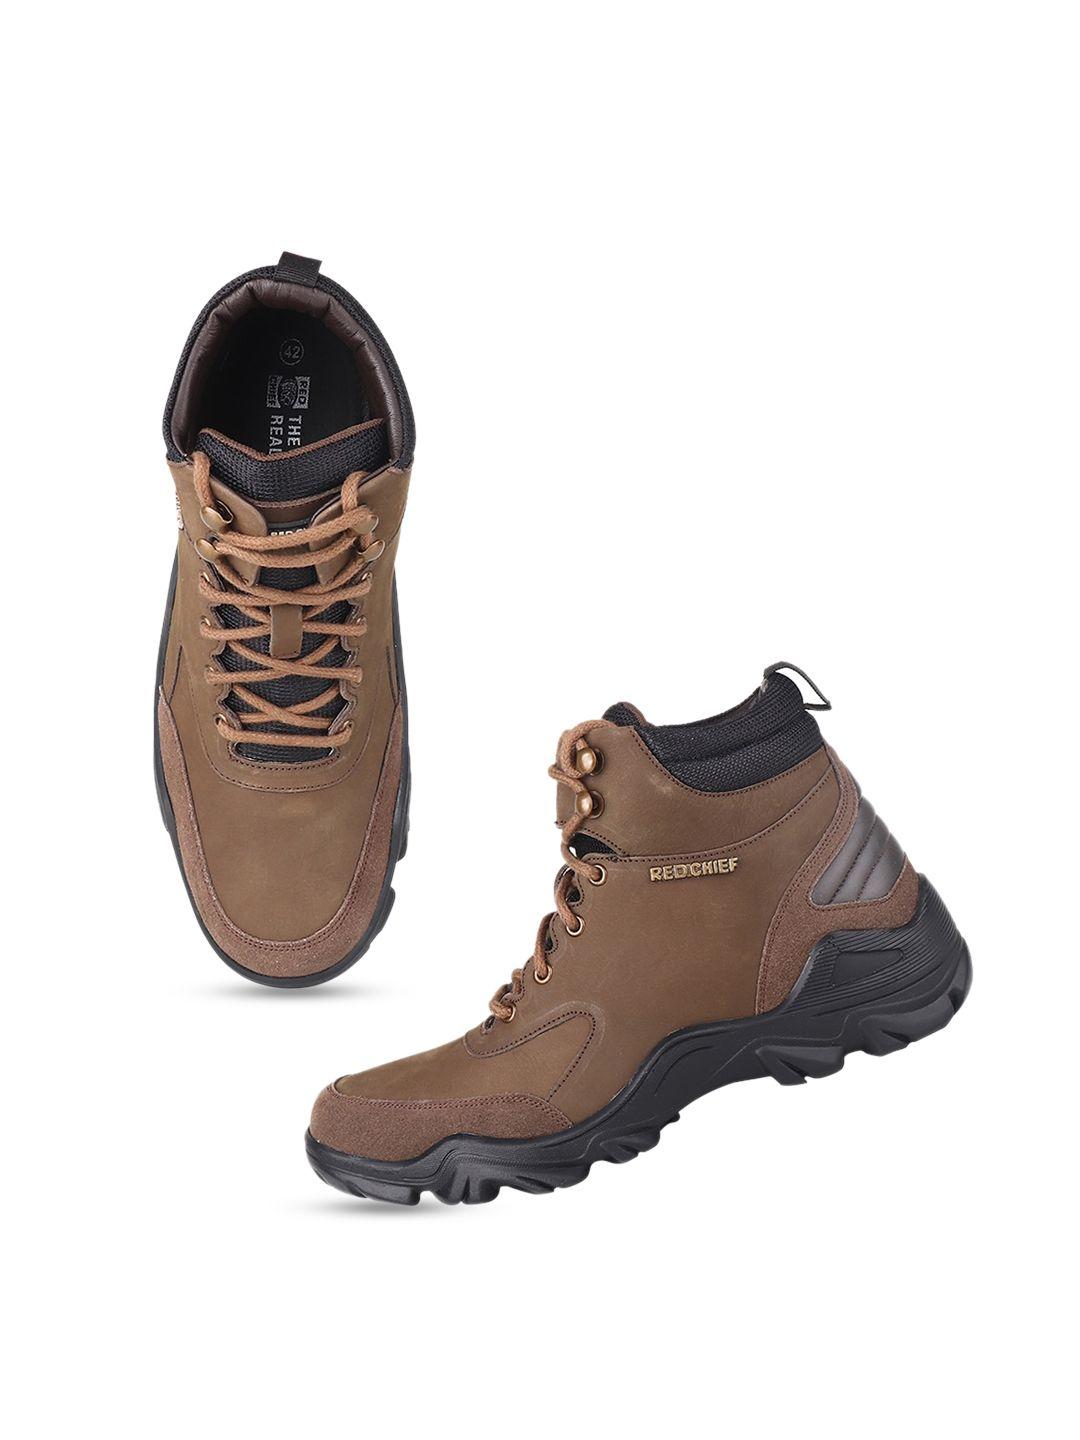 red chief men leather hiking boots